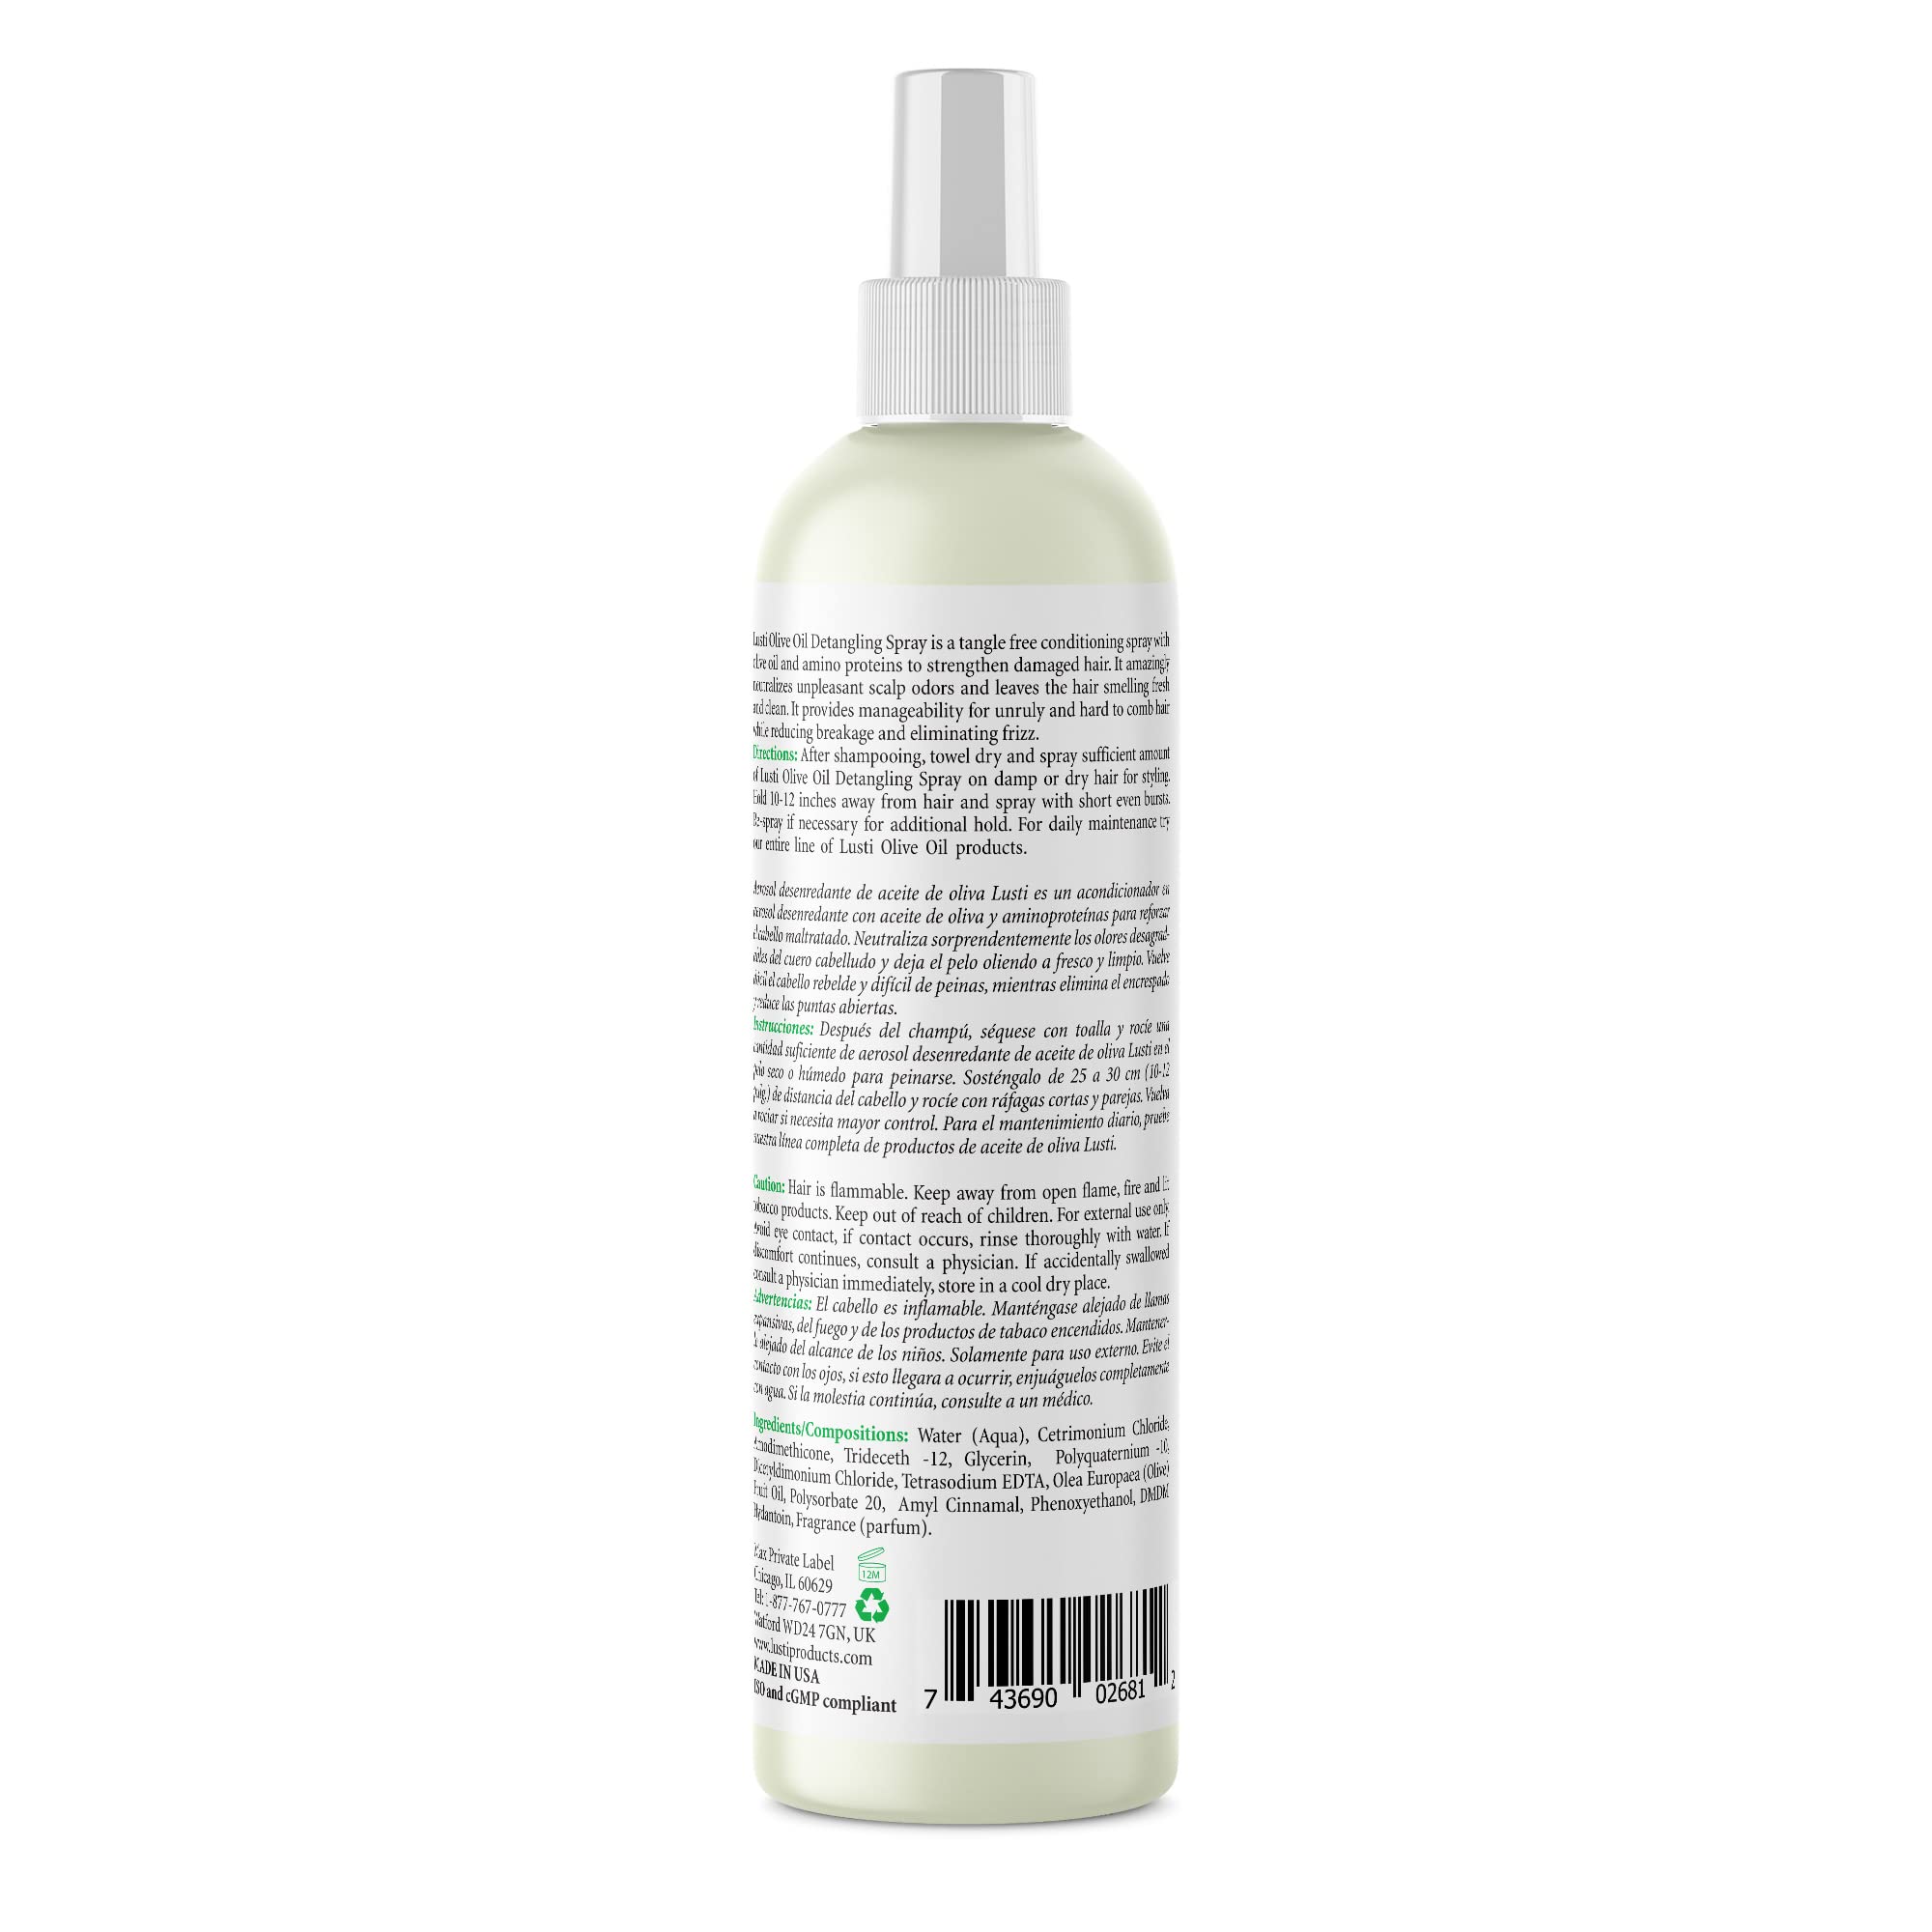 Lusti Olive Oil Detangling Spray, 12 fl oz - Anti-Frizz - Strengthen Damaged Hair - Reducing Breakage - Enriched with Amino Proteins